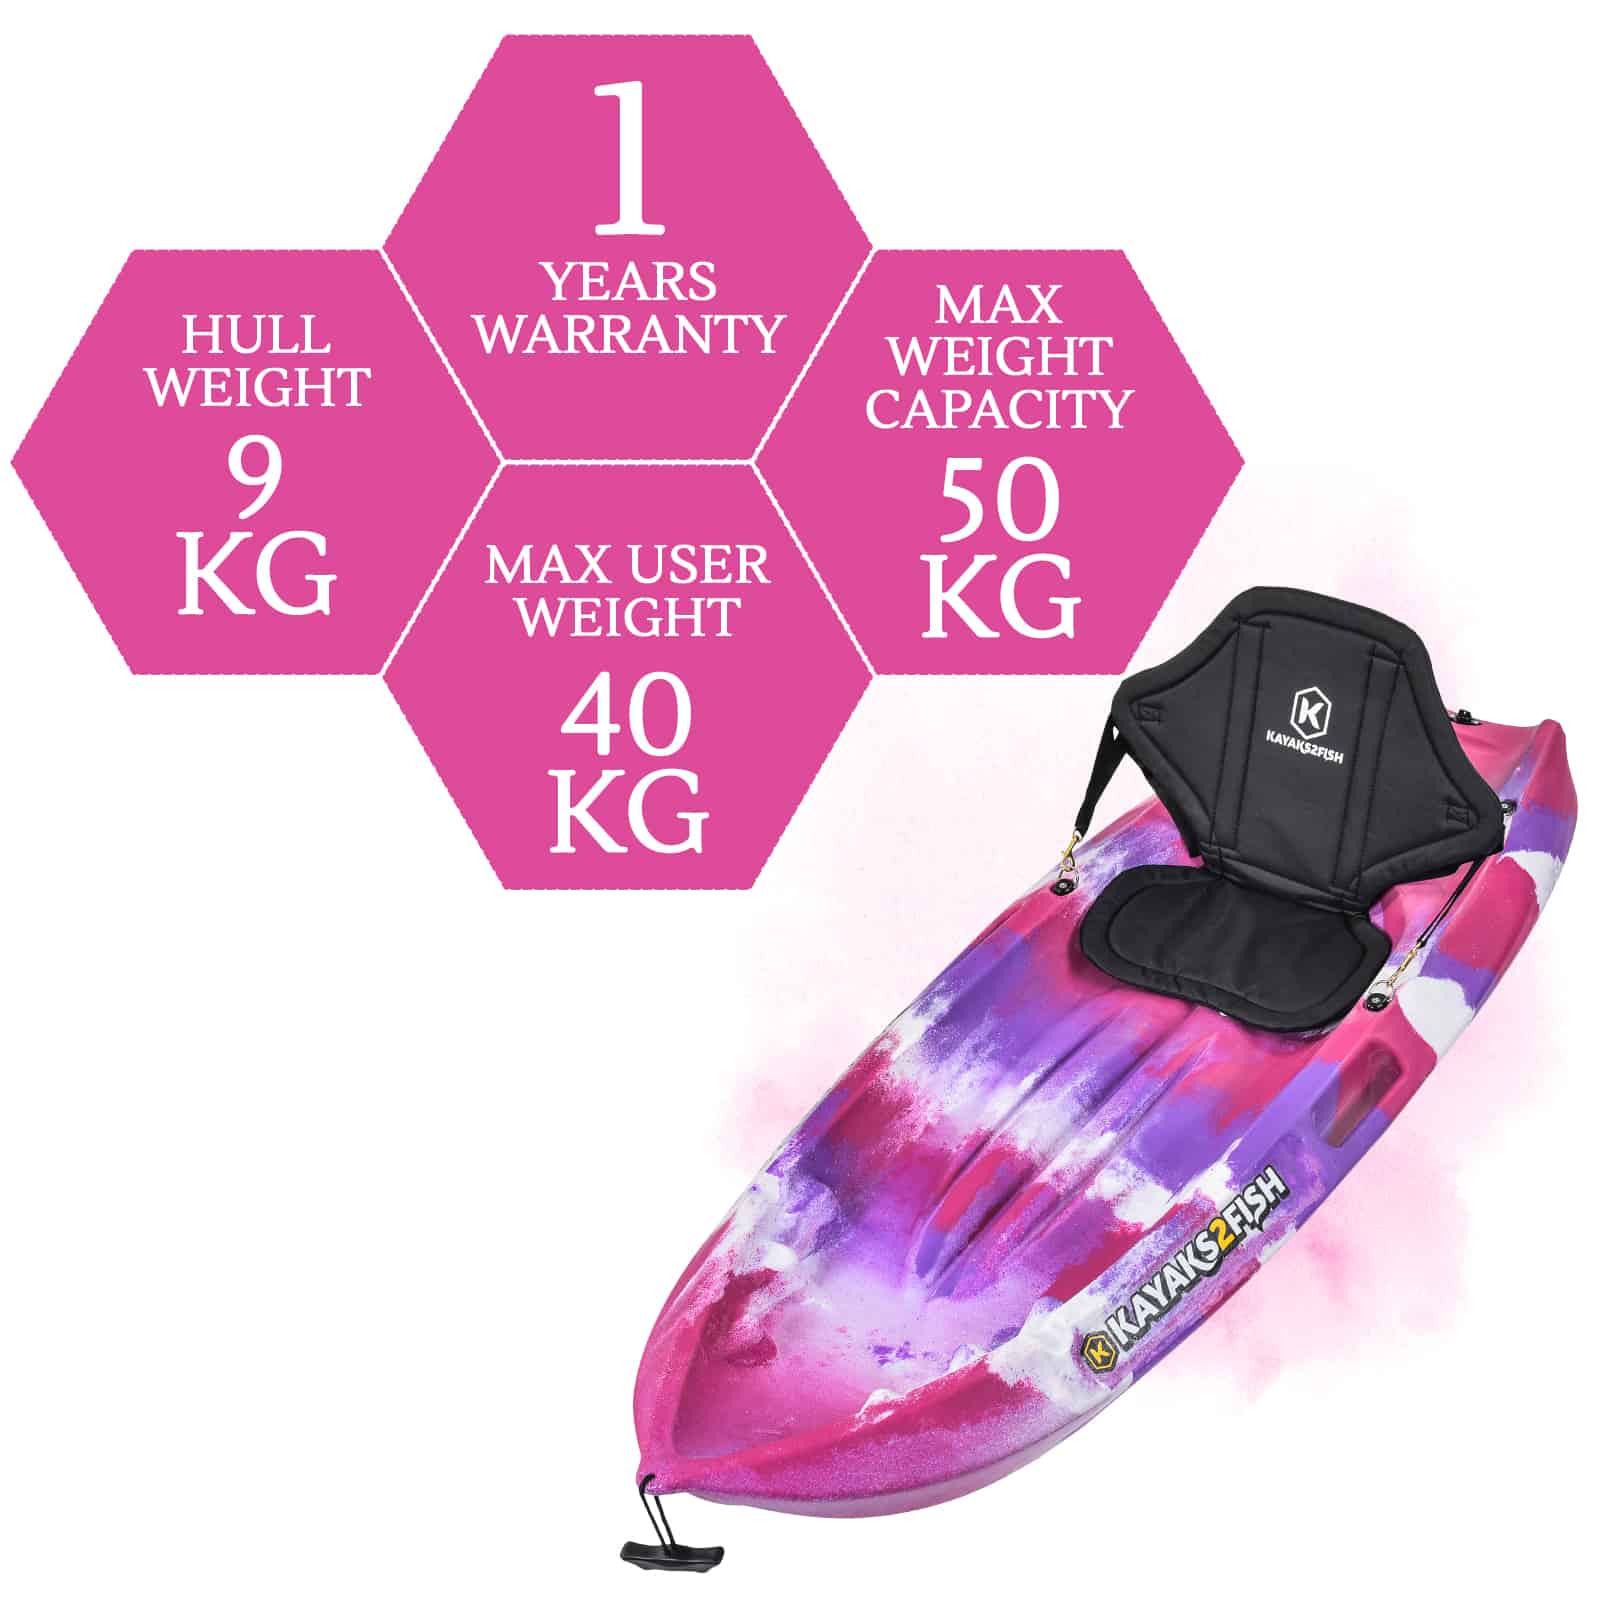 K2FB-PUFFIN-PINKCAMO specifications